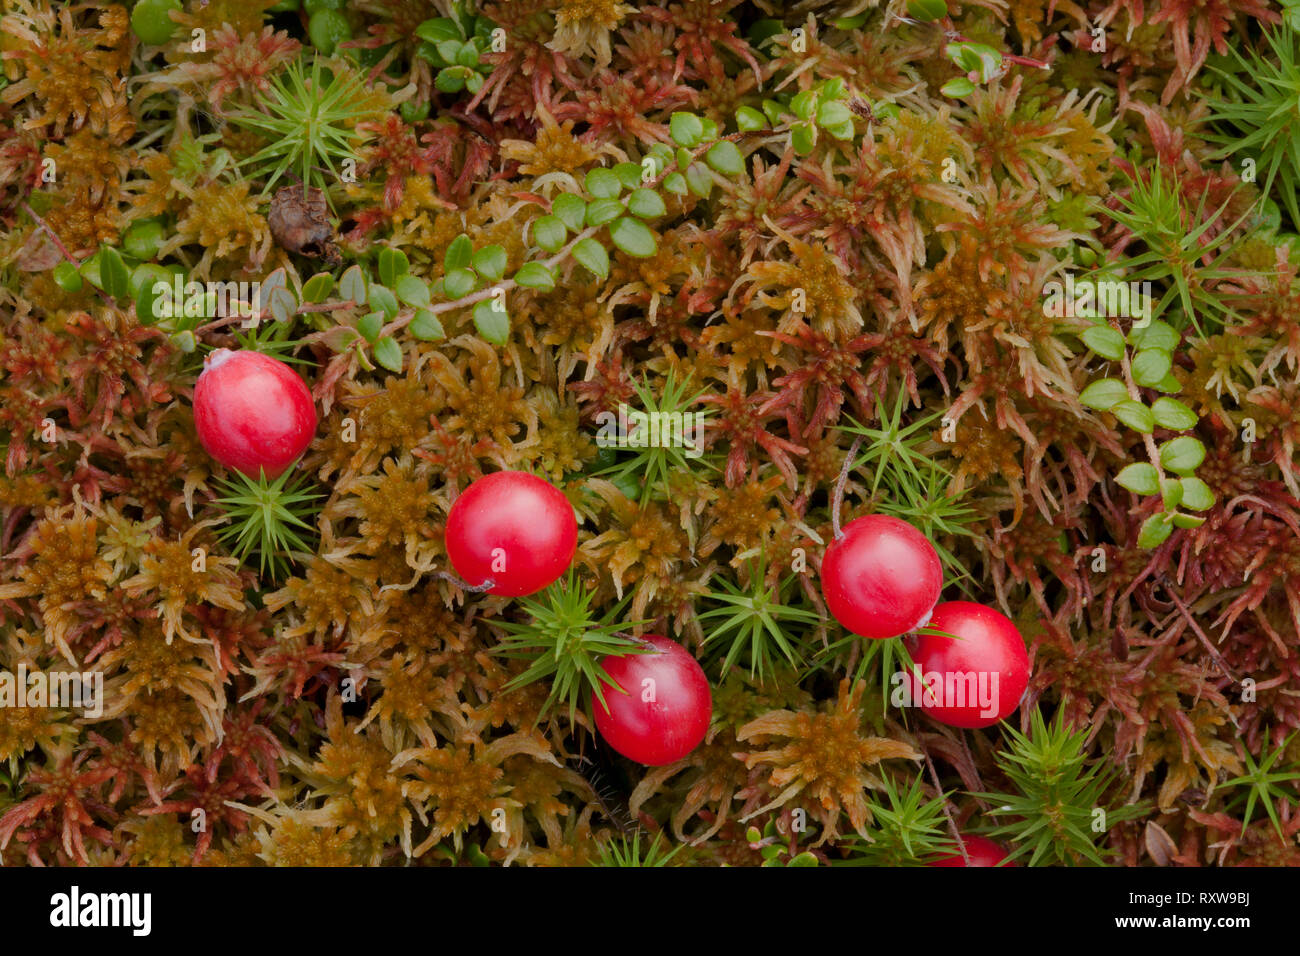 Tasty cranberries are plentiful along the James Bay highway towards Radisson in Northern Quebec where the huge James Bay Hydro Quebec project is located. Quebec,Canada Stock Photo